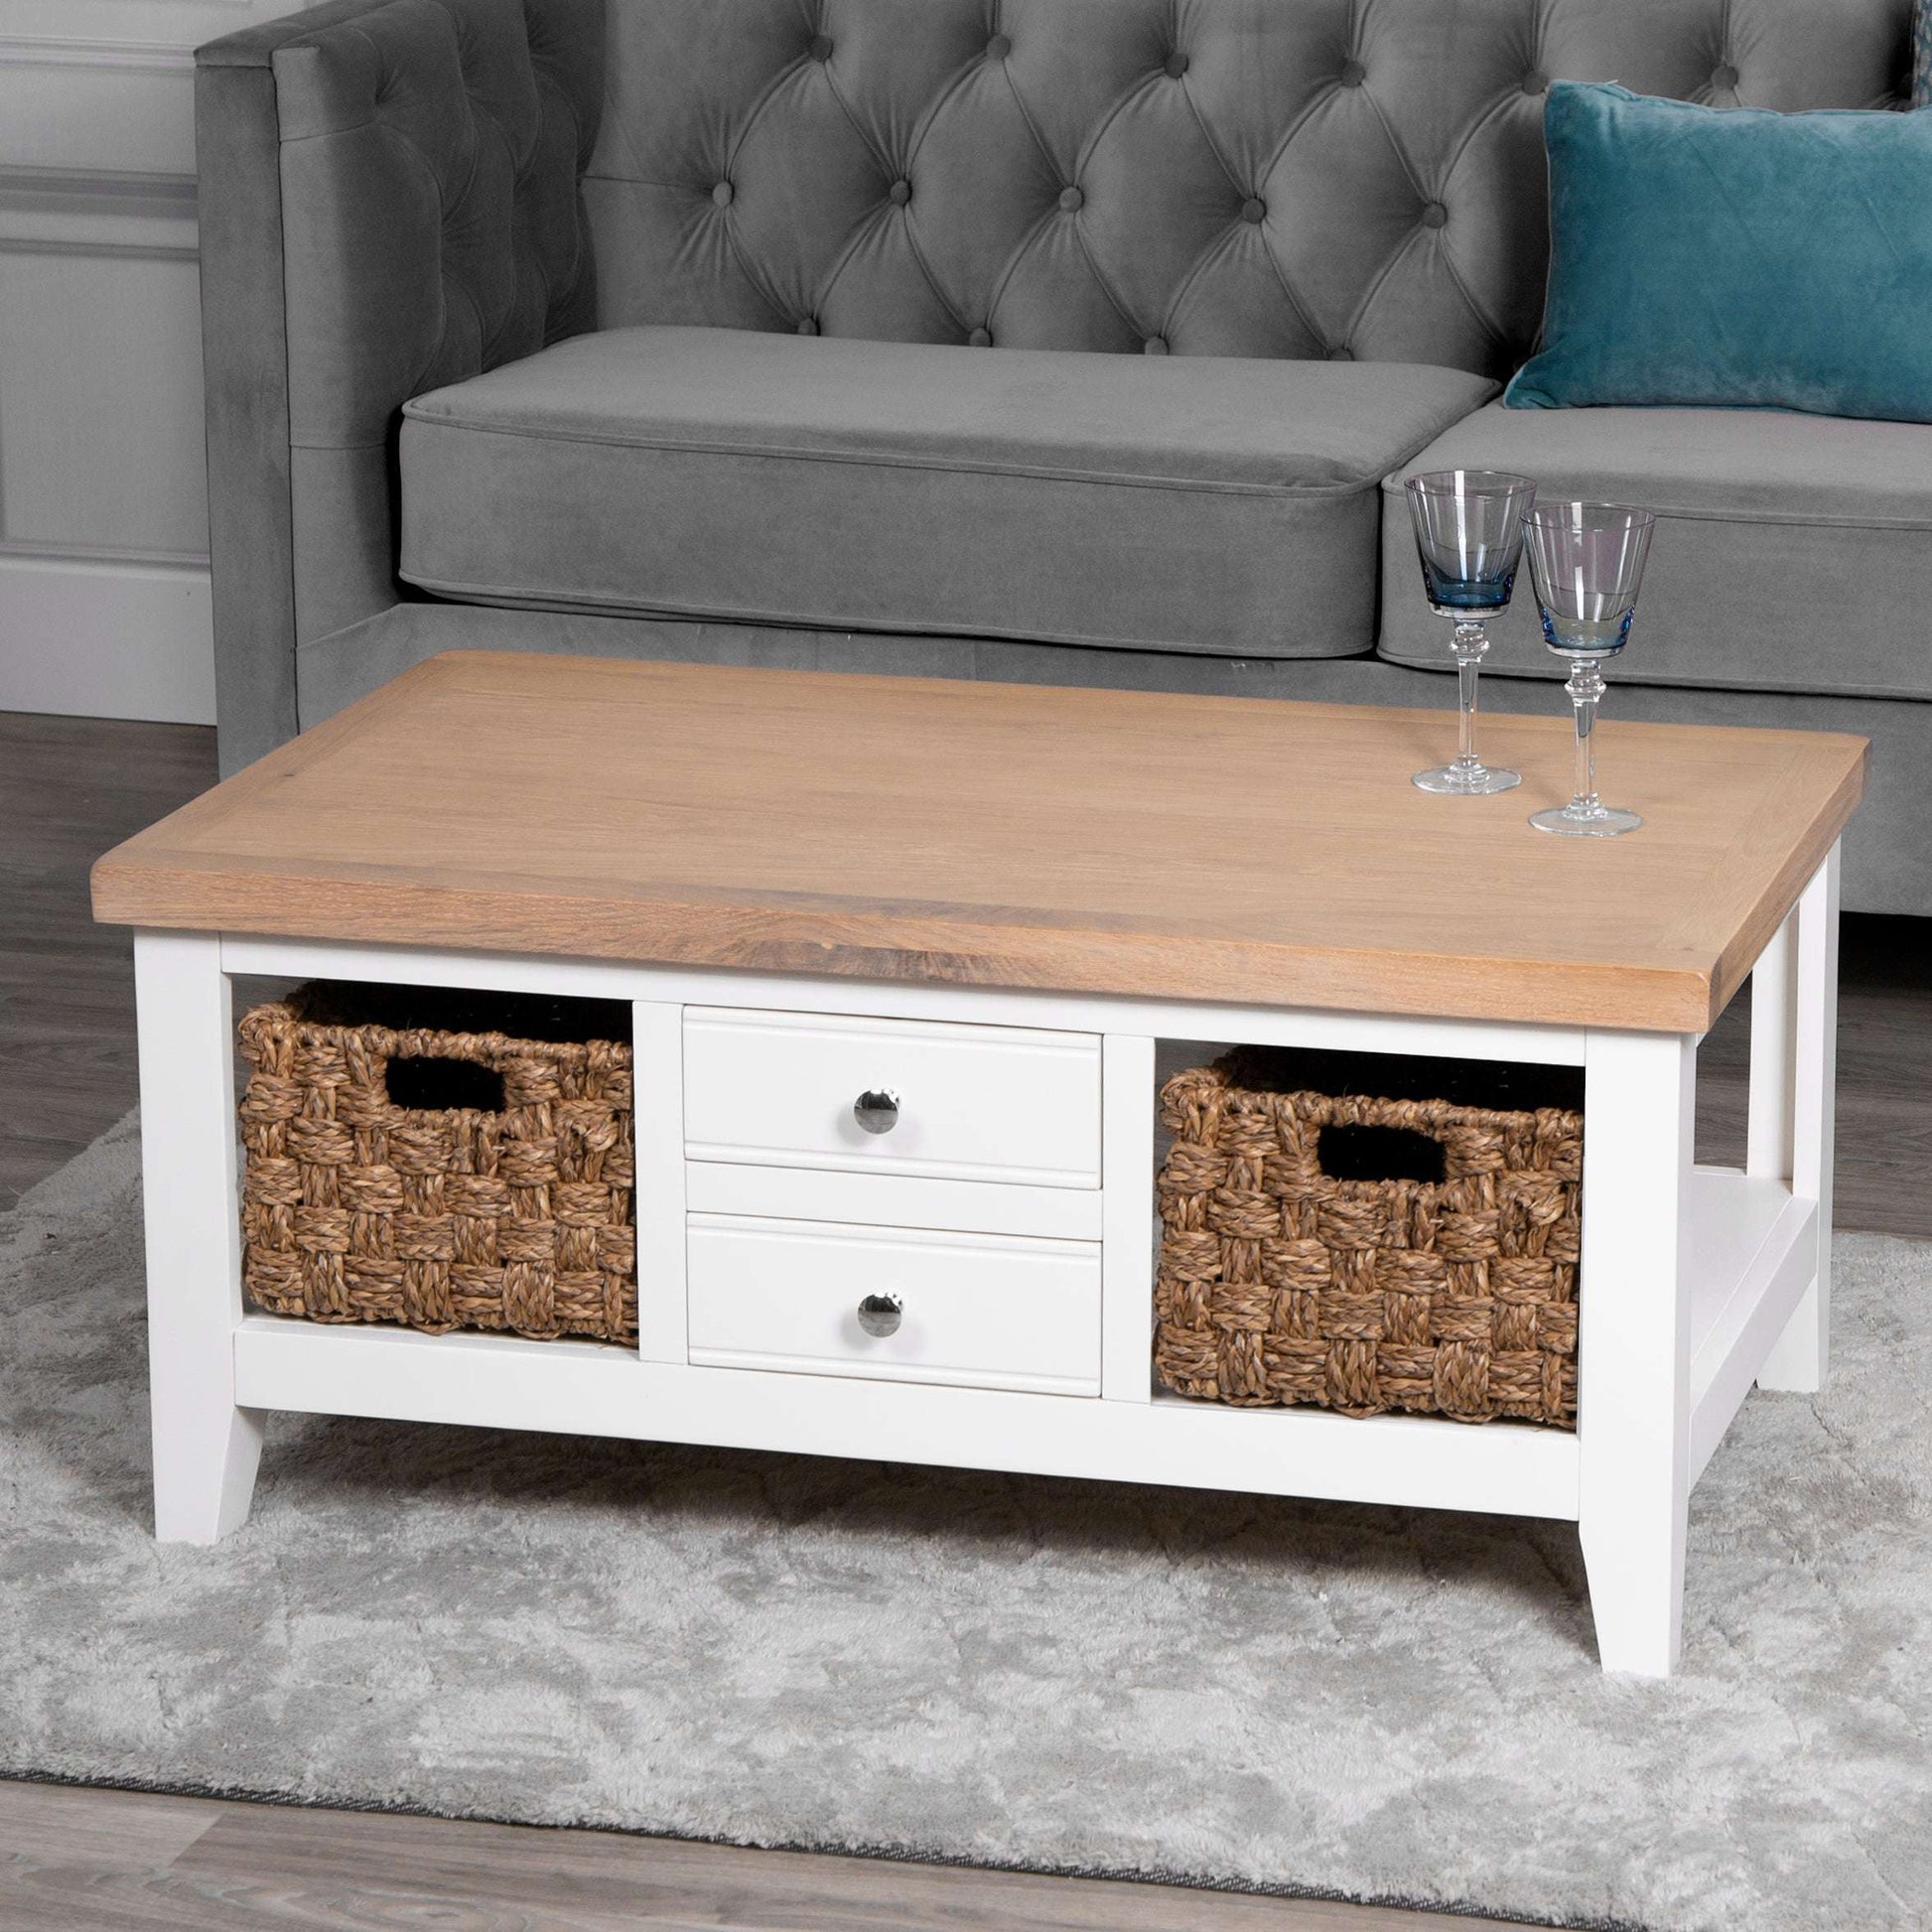 EA Dining White - Coffee table